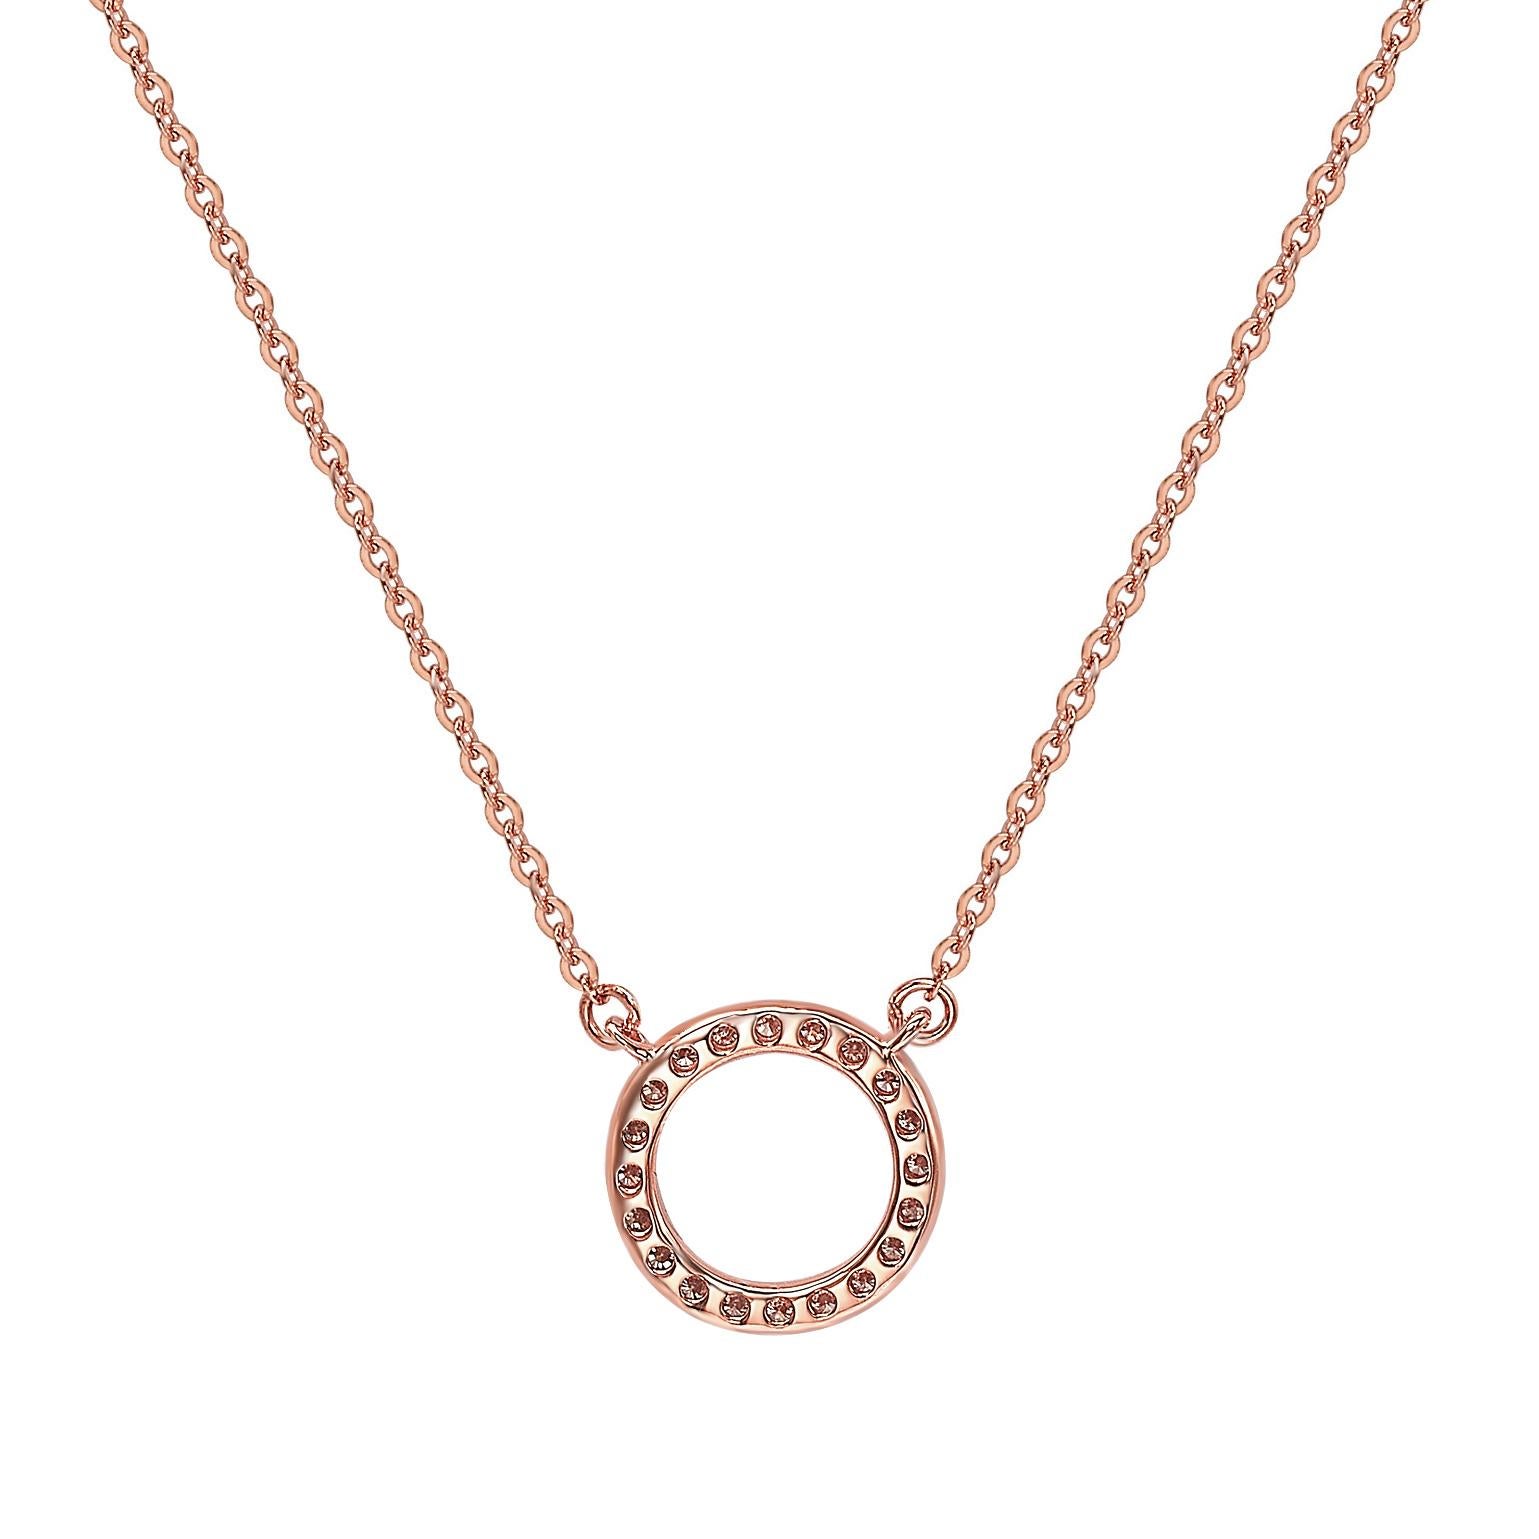 This breathtaking Suzy Levian circle necklace features natural diamonds, hand-set in 14-Karat rose gold. It's the perfect gift to let someone special know you're thinking of them. Each circle necklace features a single row of pave natural white